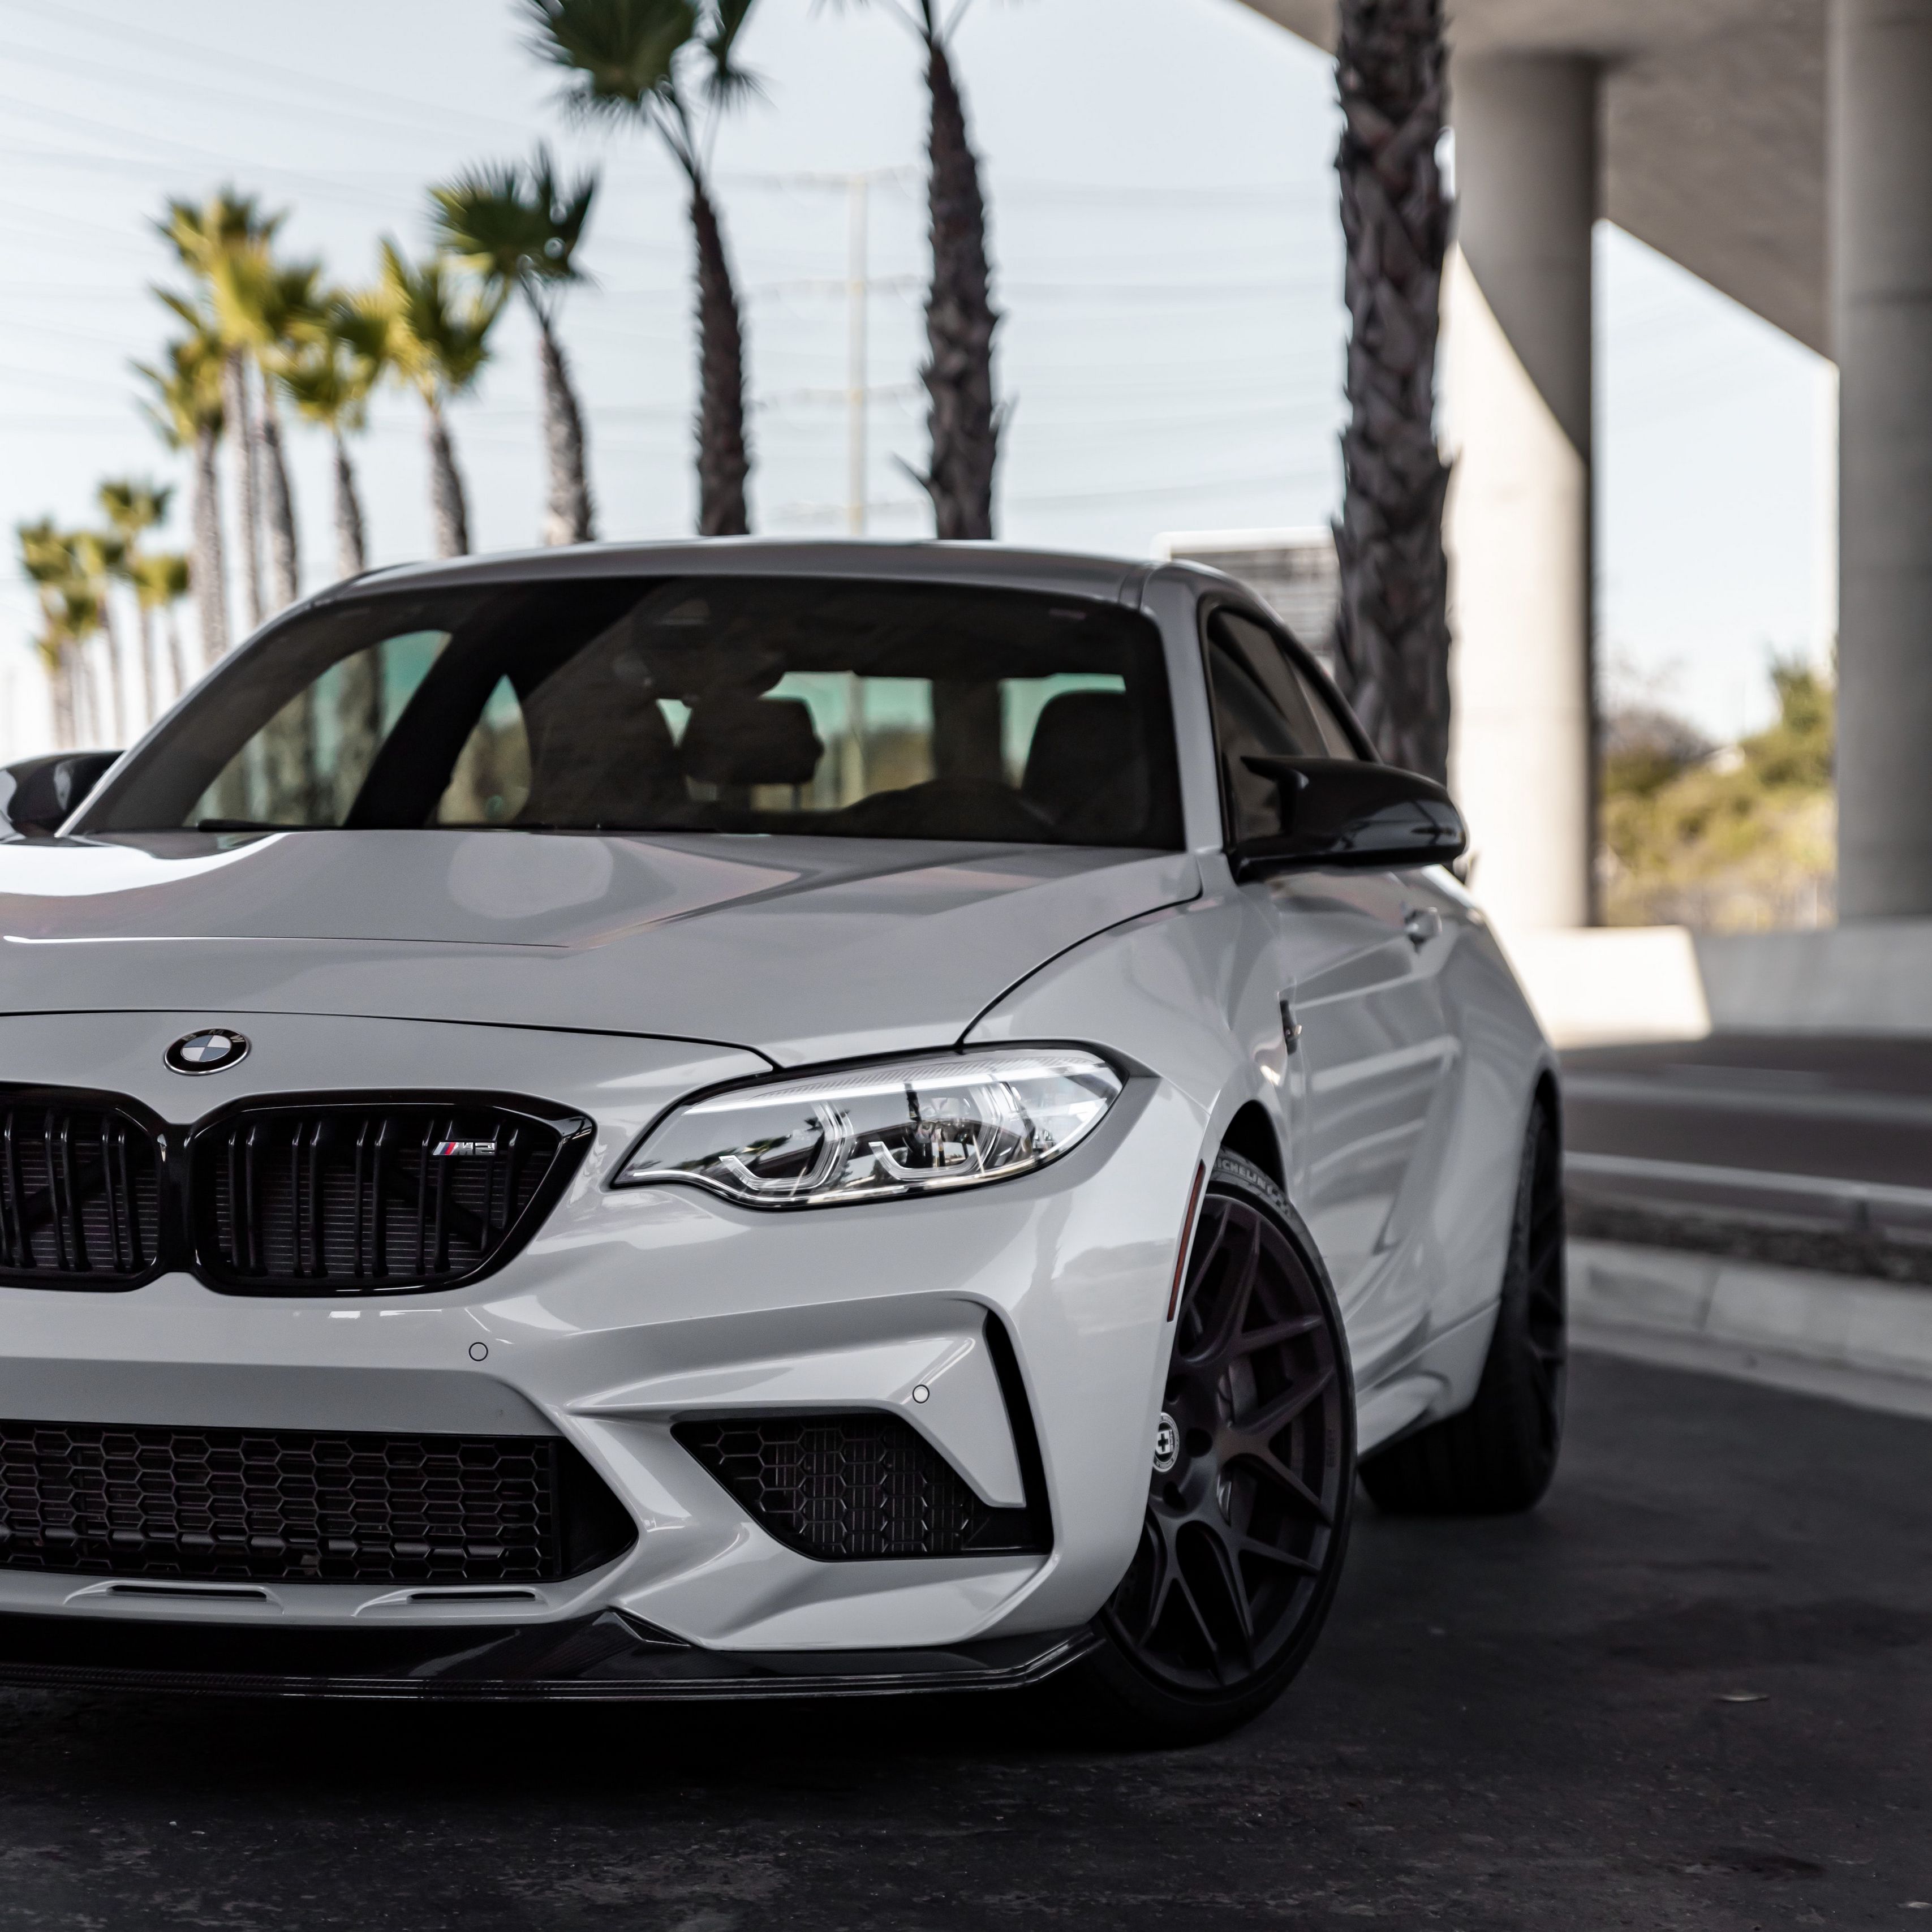 Download Wallpaper 3415x3415 Bmw M2 Bmw Car White Front View Ipad Pro 12 9 Retina For Parallax Hd Background